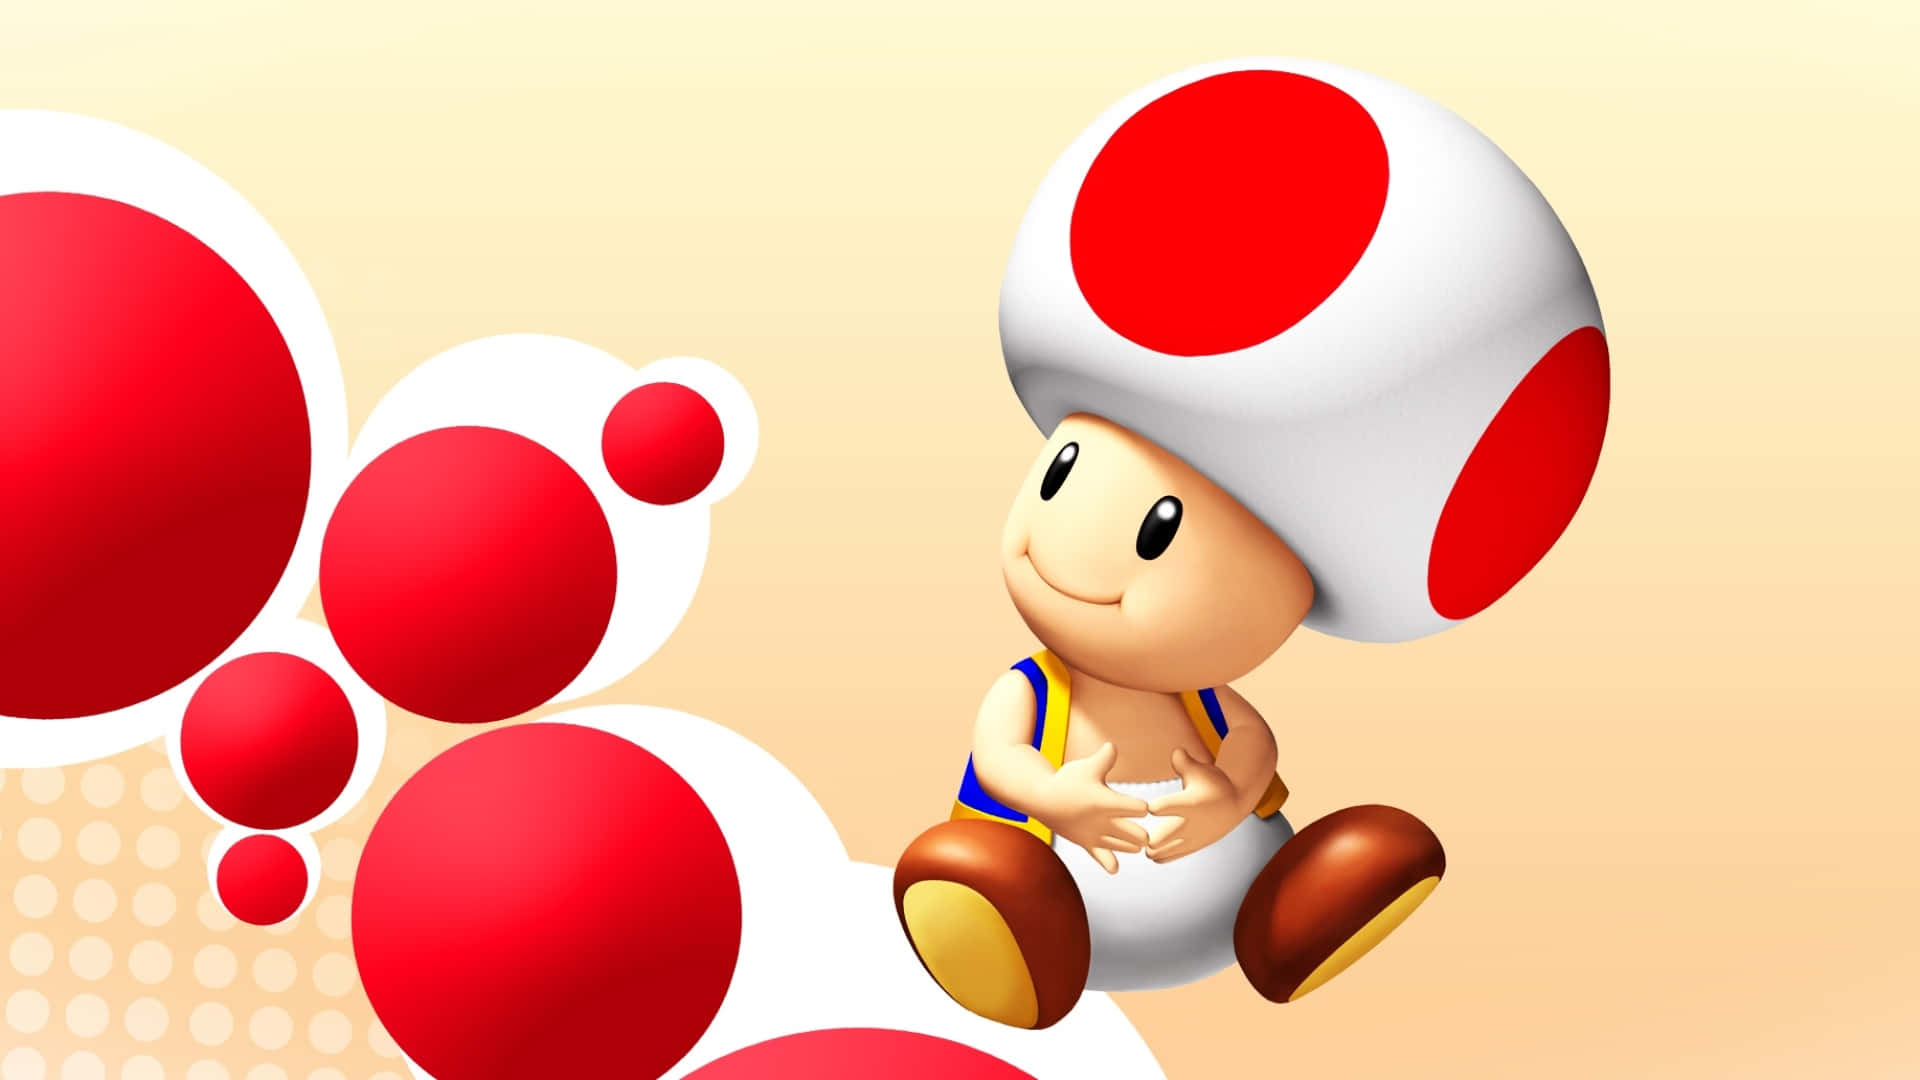 Classic Red Super Mushroom from the Mario Universe Wallpaper